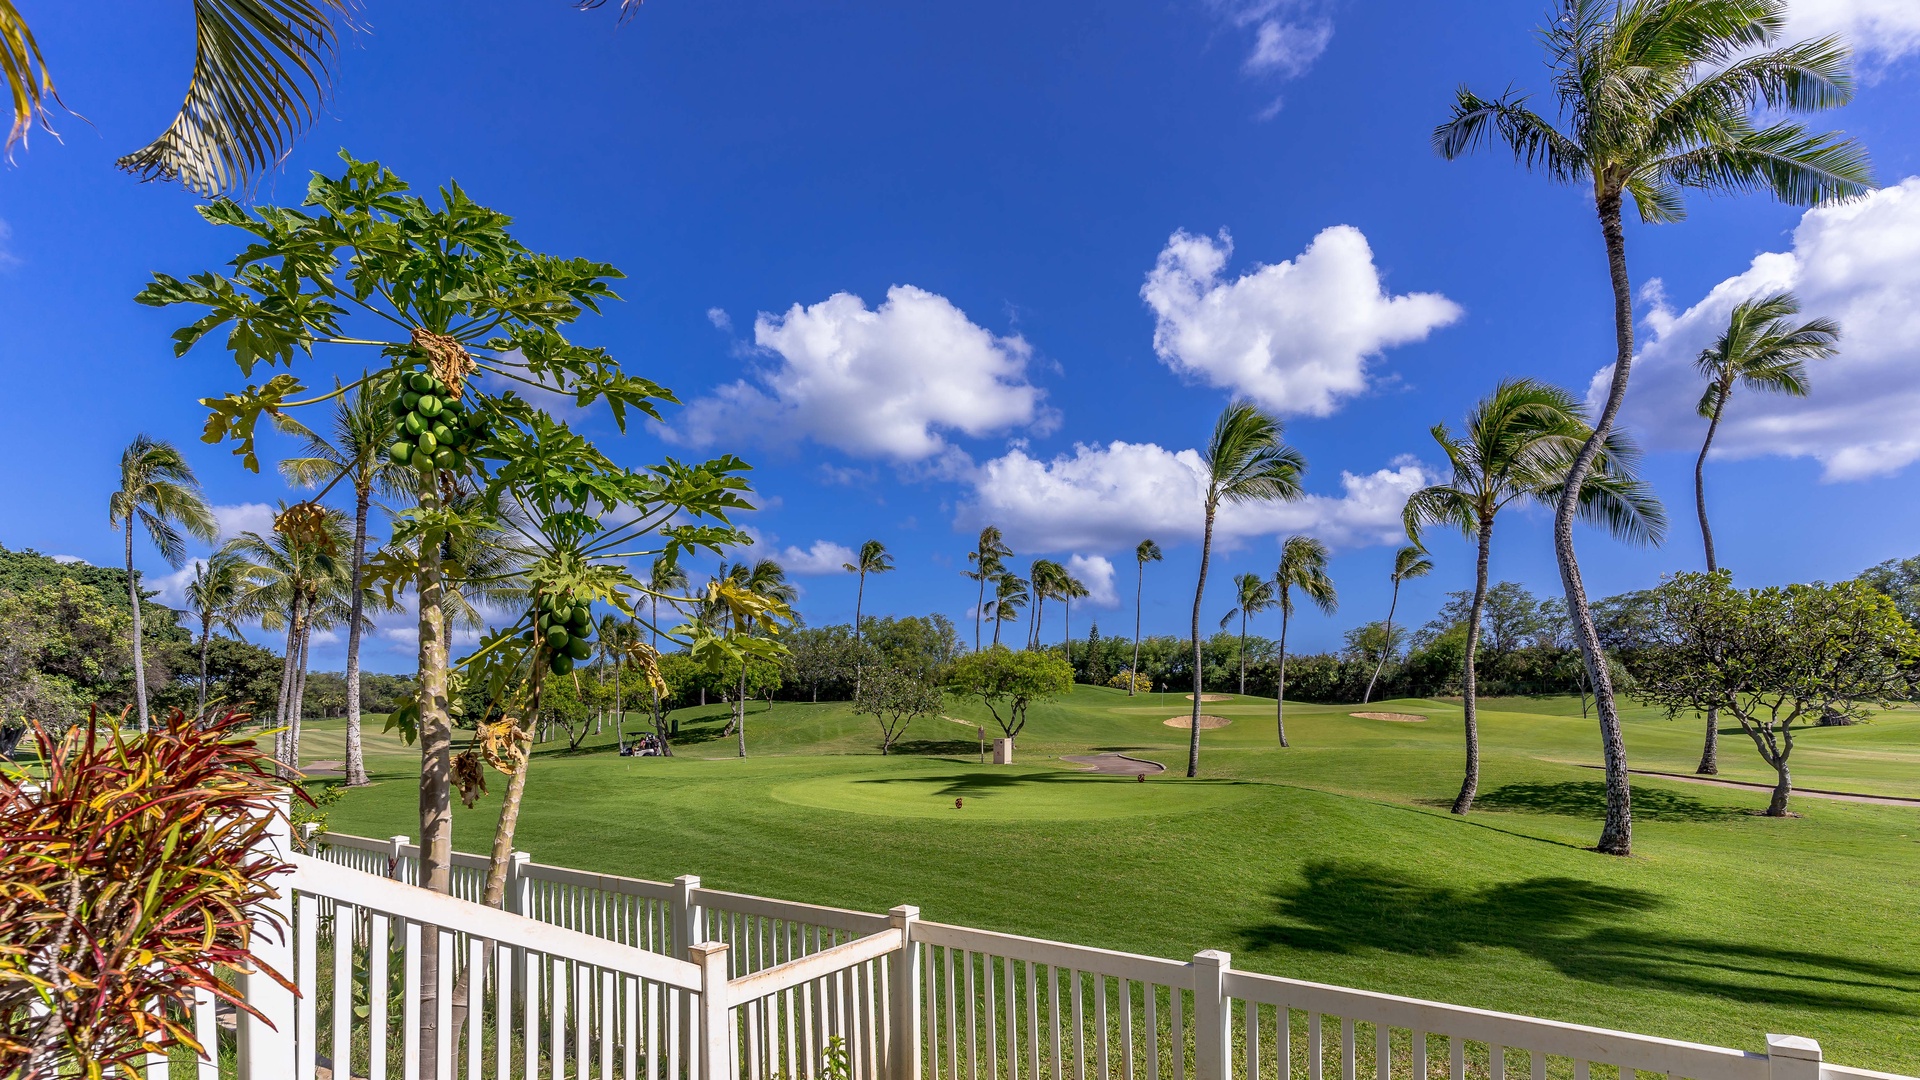 Kapolei Vacation Rentals, Fairways at Ko Olina 20G - One of the most beautiful golf courses on earth.